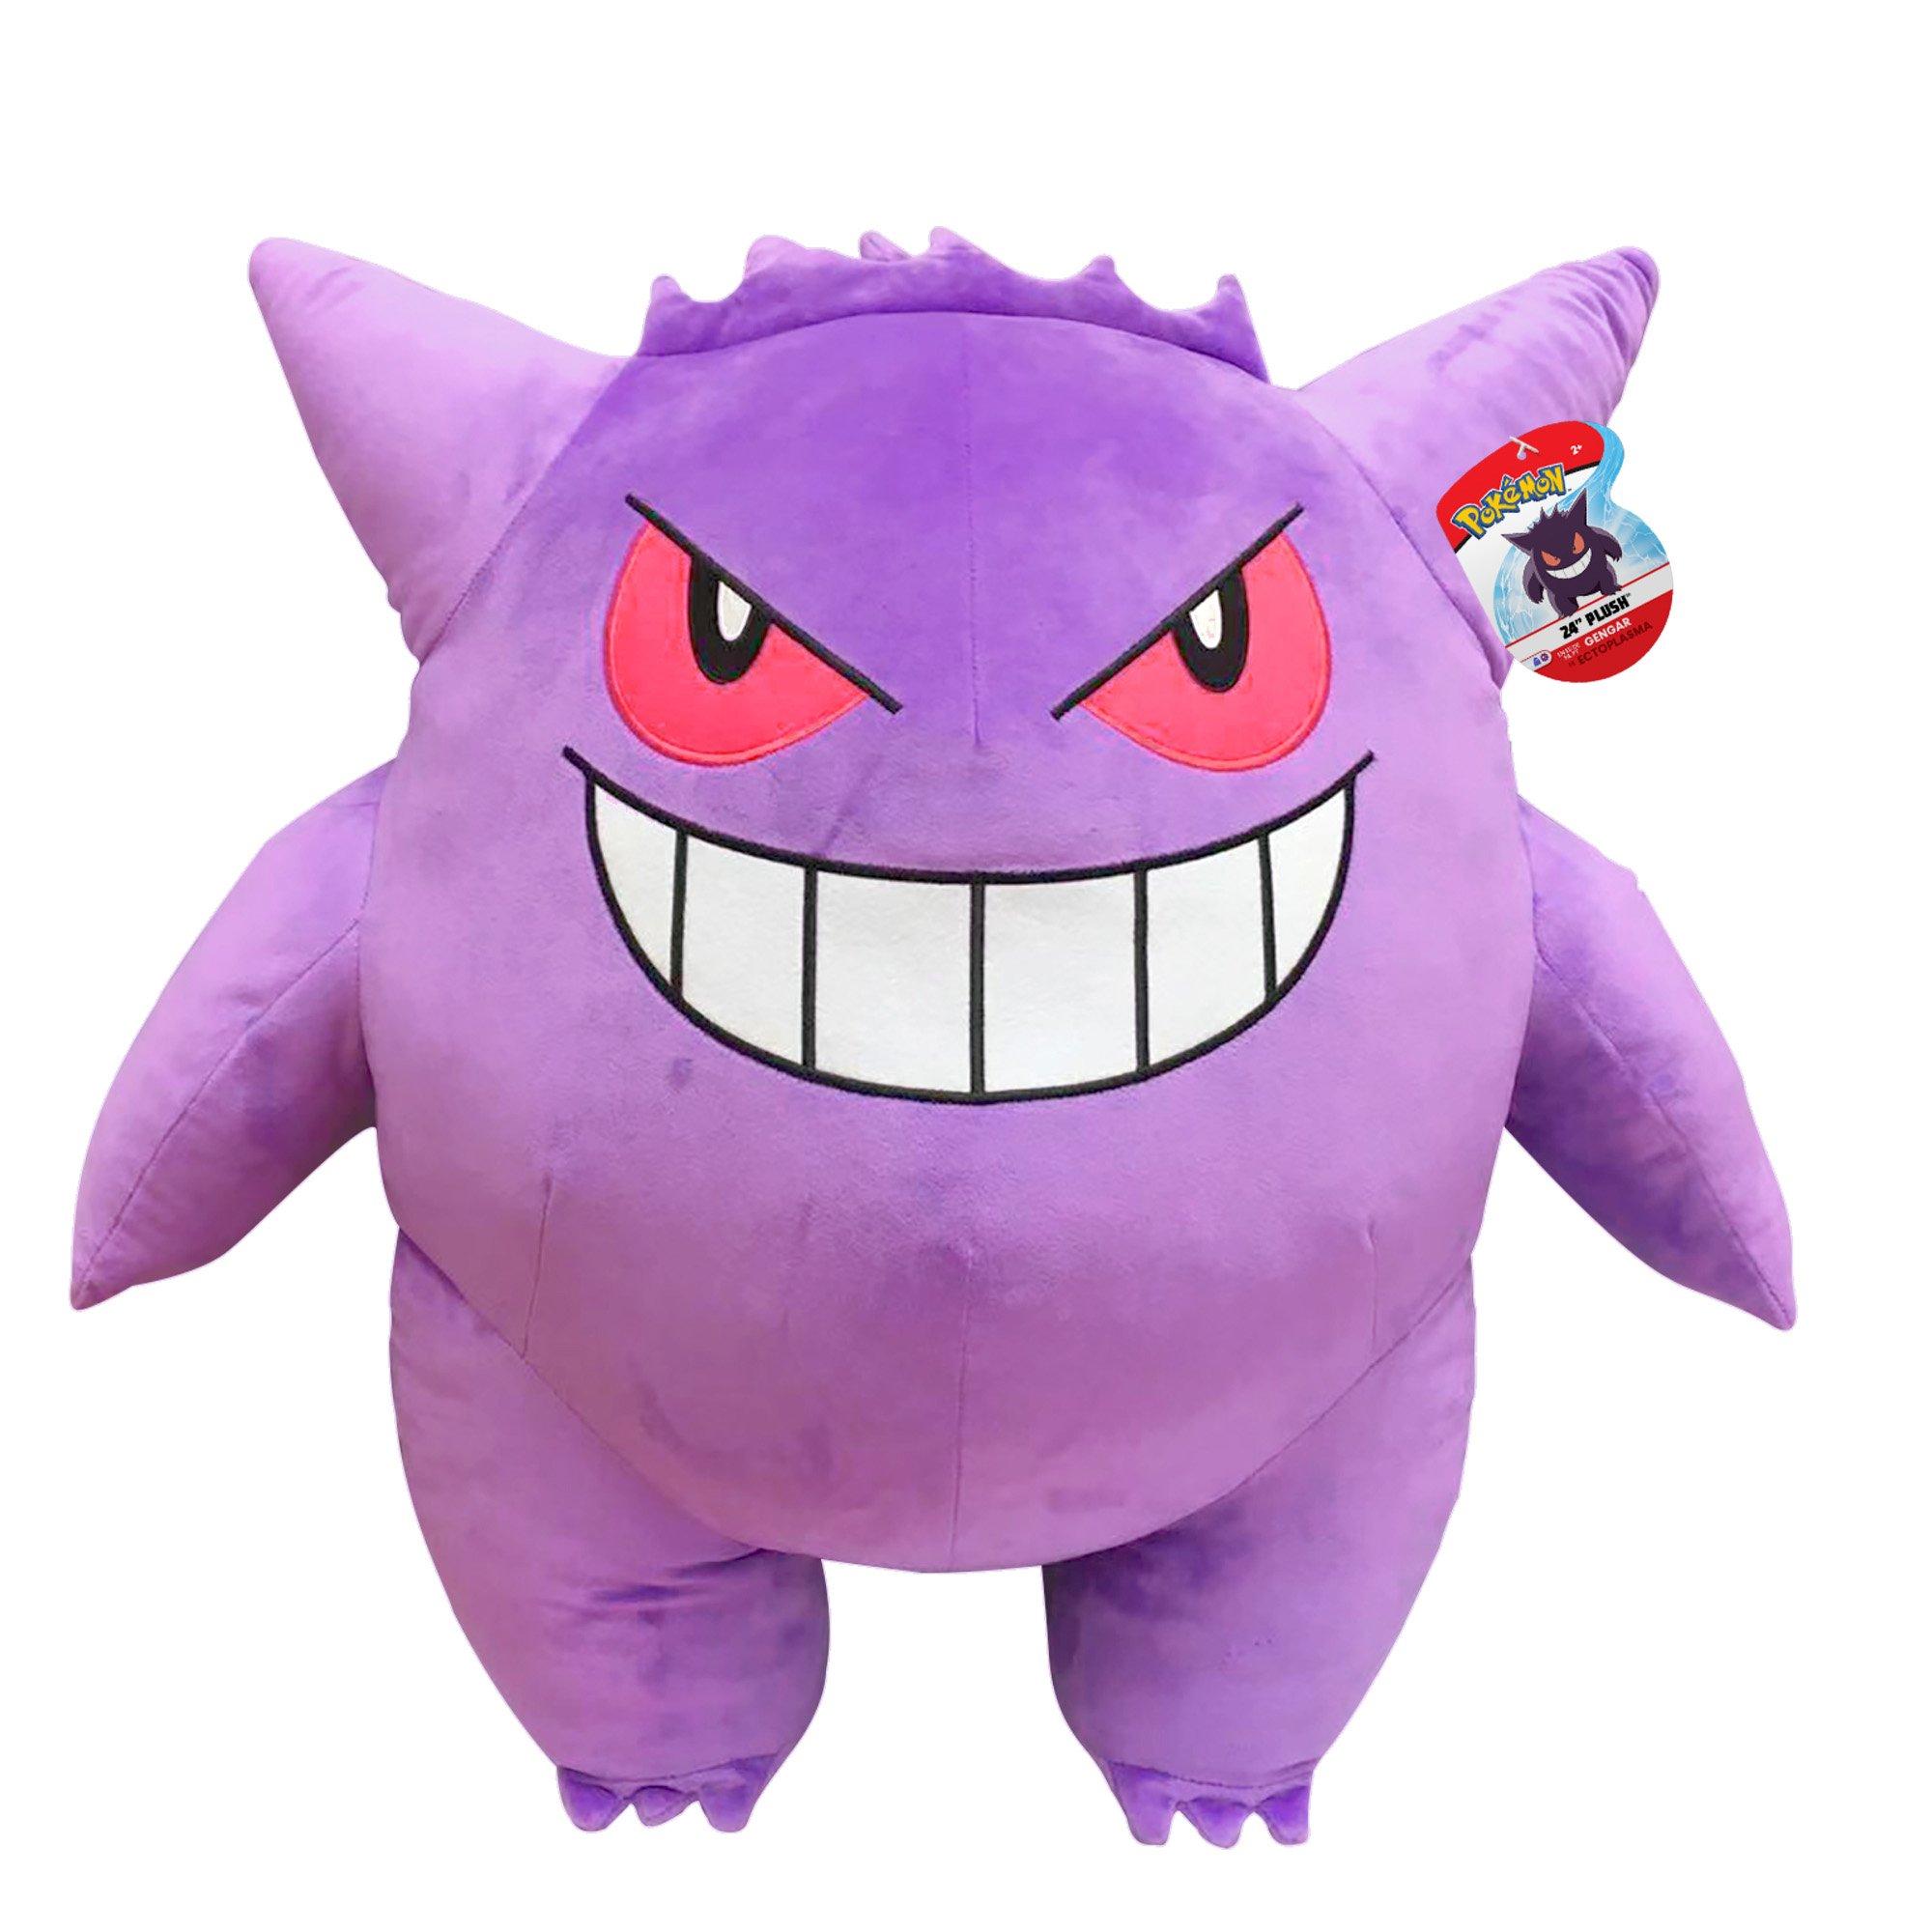 Switch's Wholesale Assorted Genders, Biposting, and Geekery - Alphabetical  Gender of the Day: Gengar #GenderOfTheDay #Pokemon